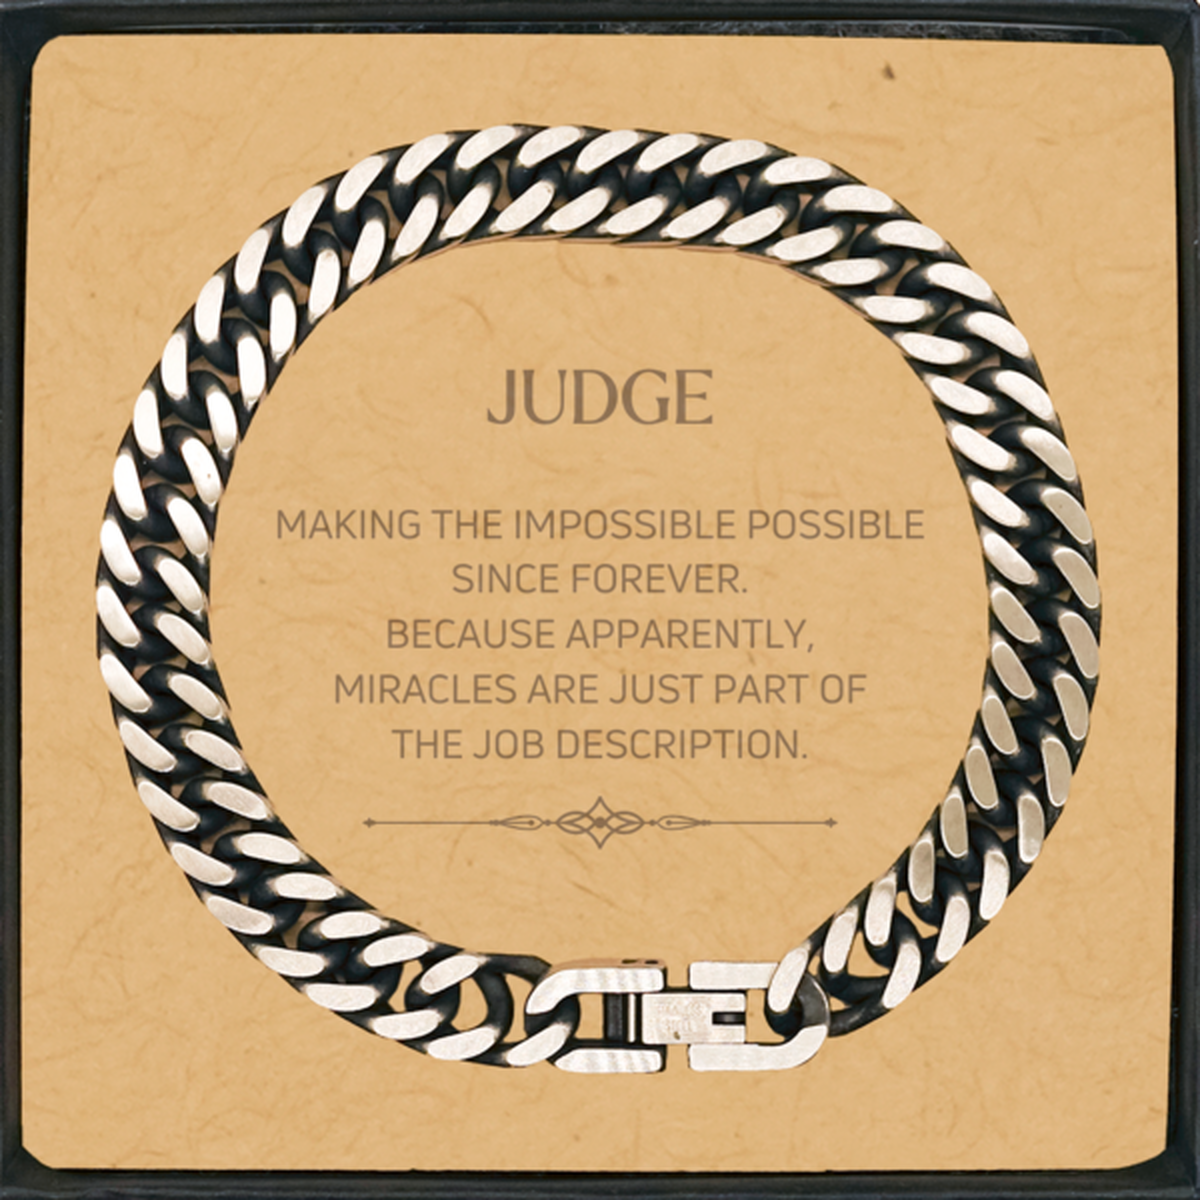 Funny Judge Gifts, Miracles are just part of the job description, Inspirational Birthday Cuban Link Chain Bracelet For Judge, Men, Women, Coworkers, Friends, Boss